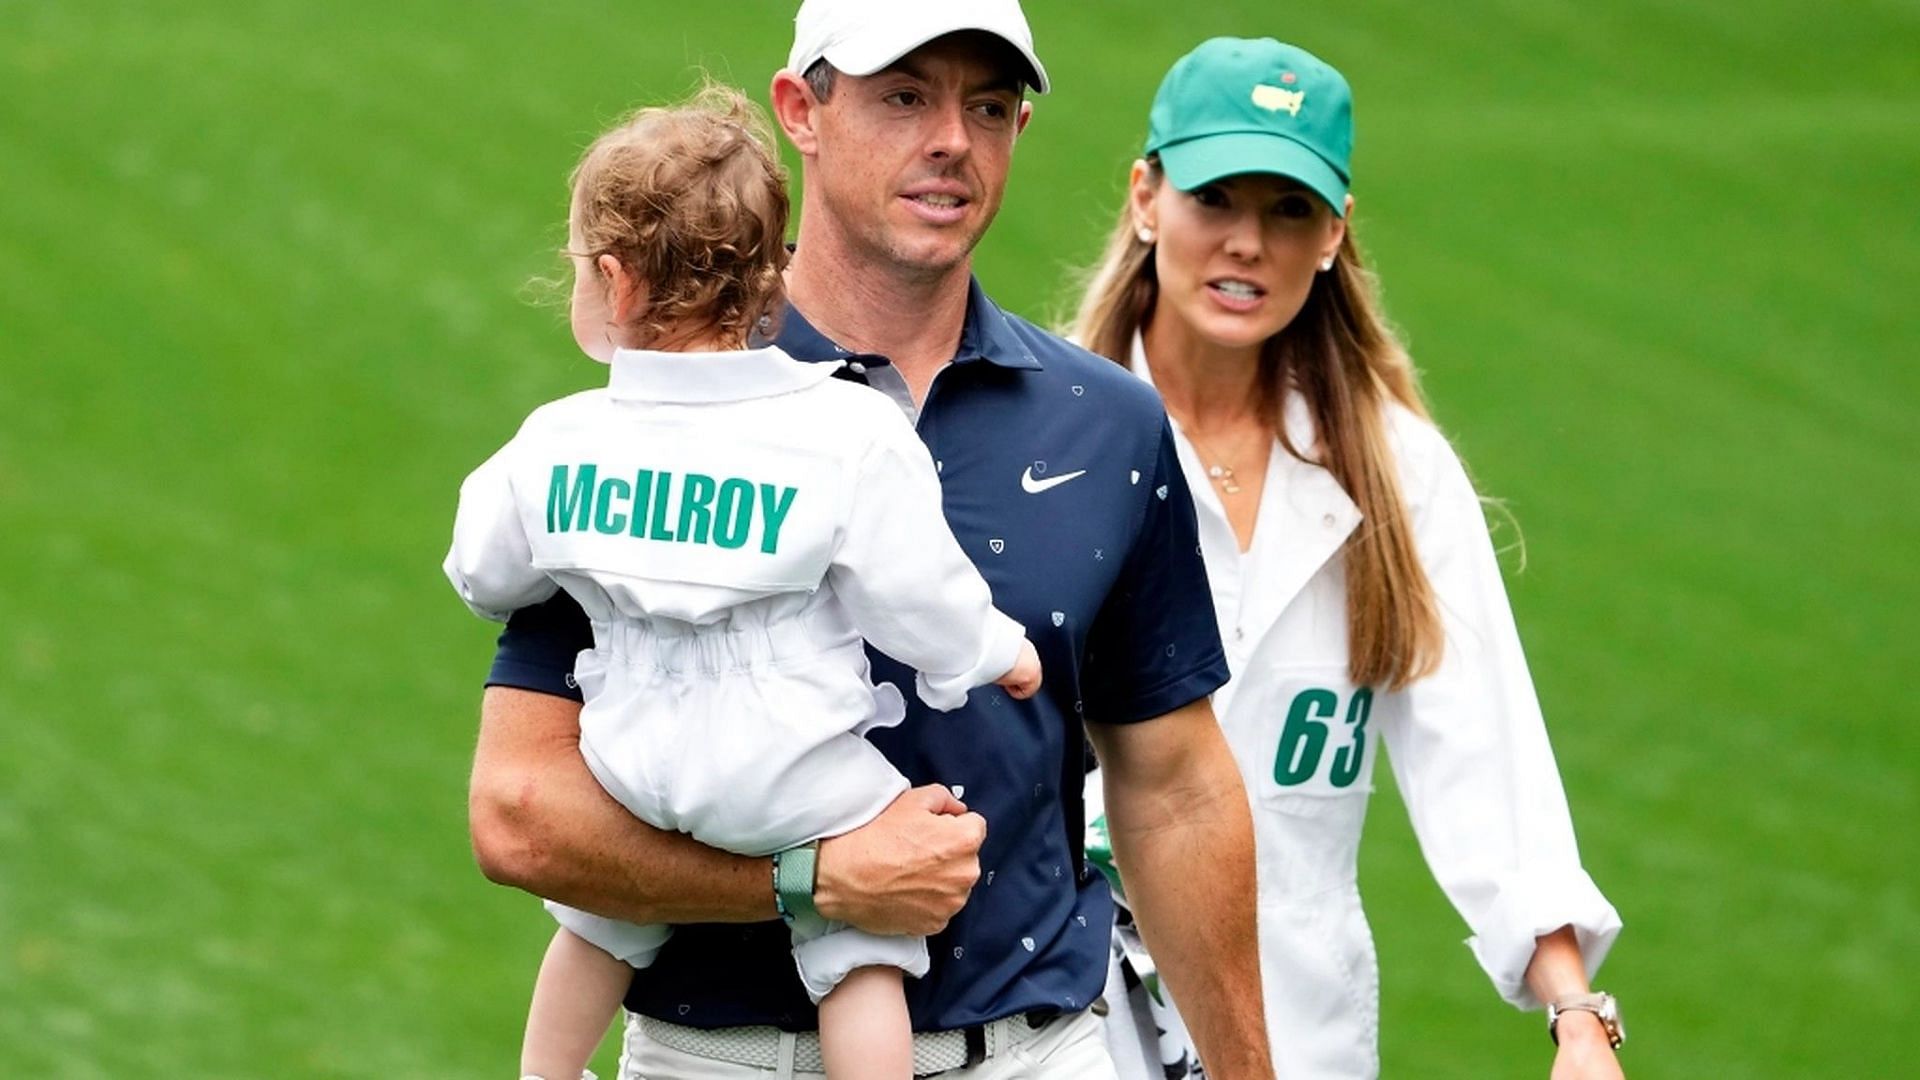 Rory McIlroy with his family (Image via US Today)